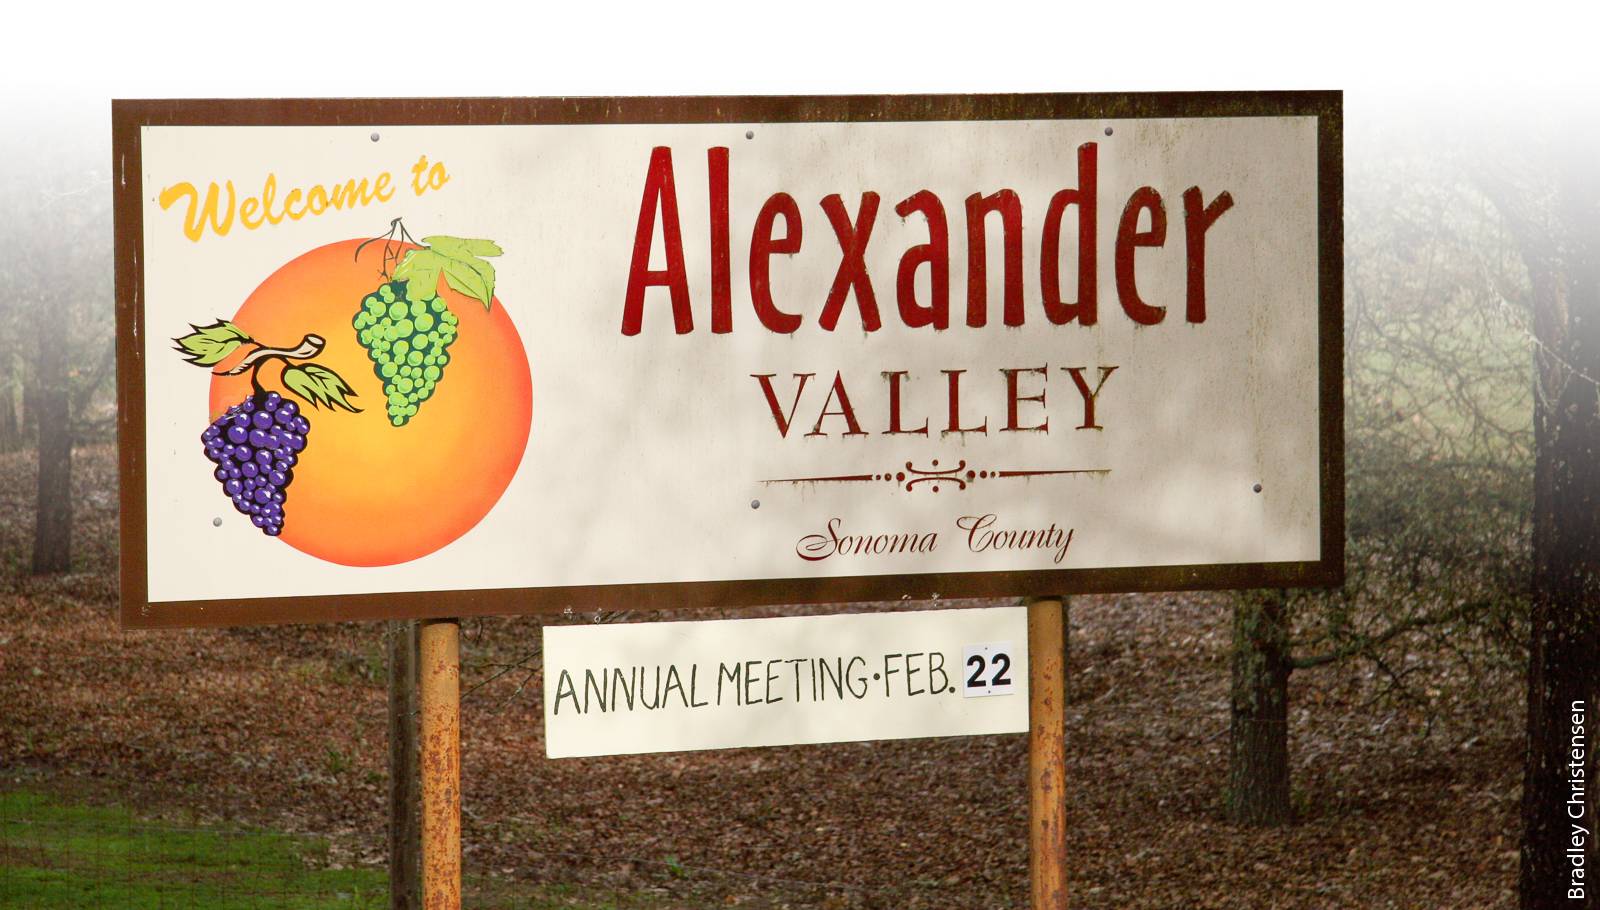 Many winemaking regions in California, such as Alexander Valley in Sonoma County, are developing recognizable identities that add value to their wines.